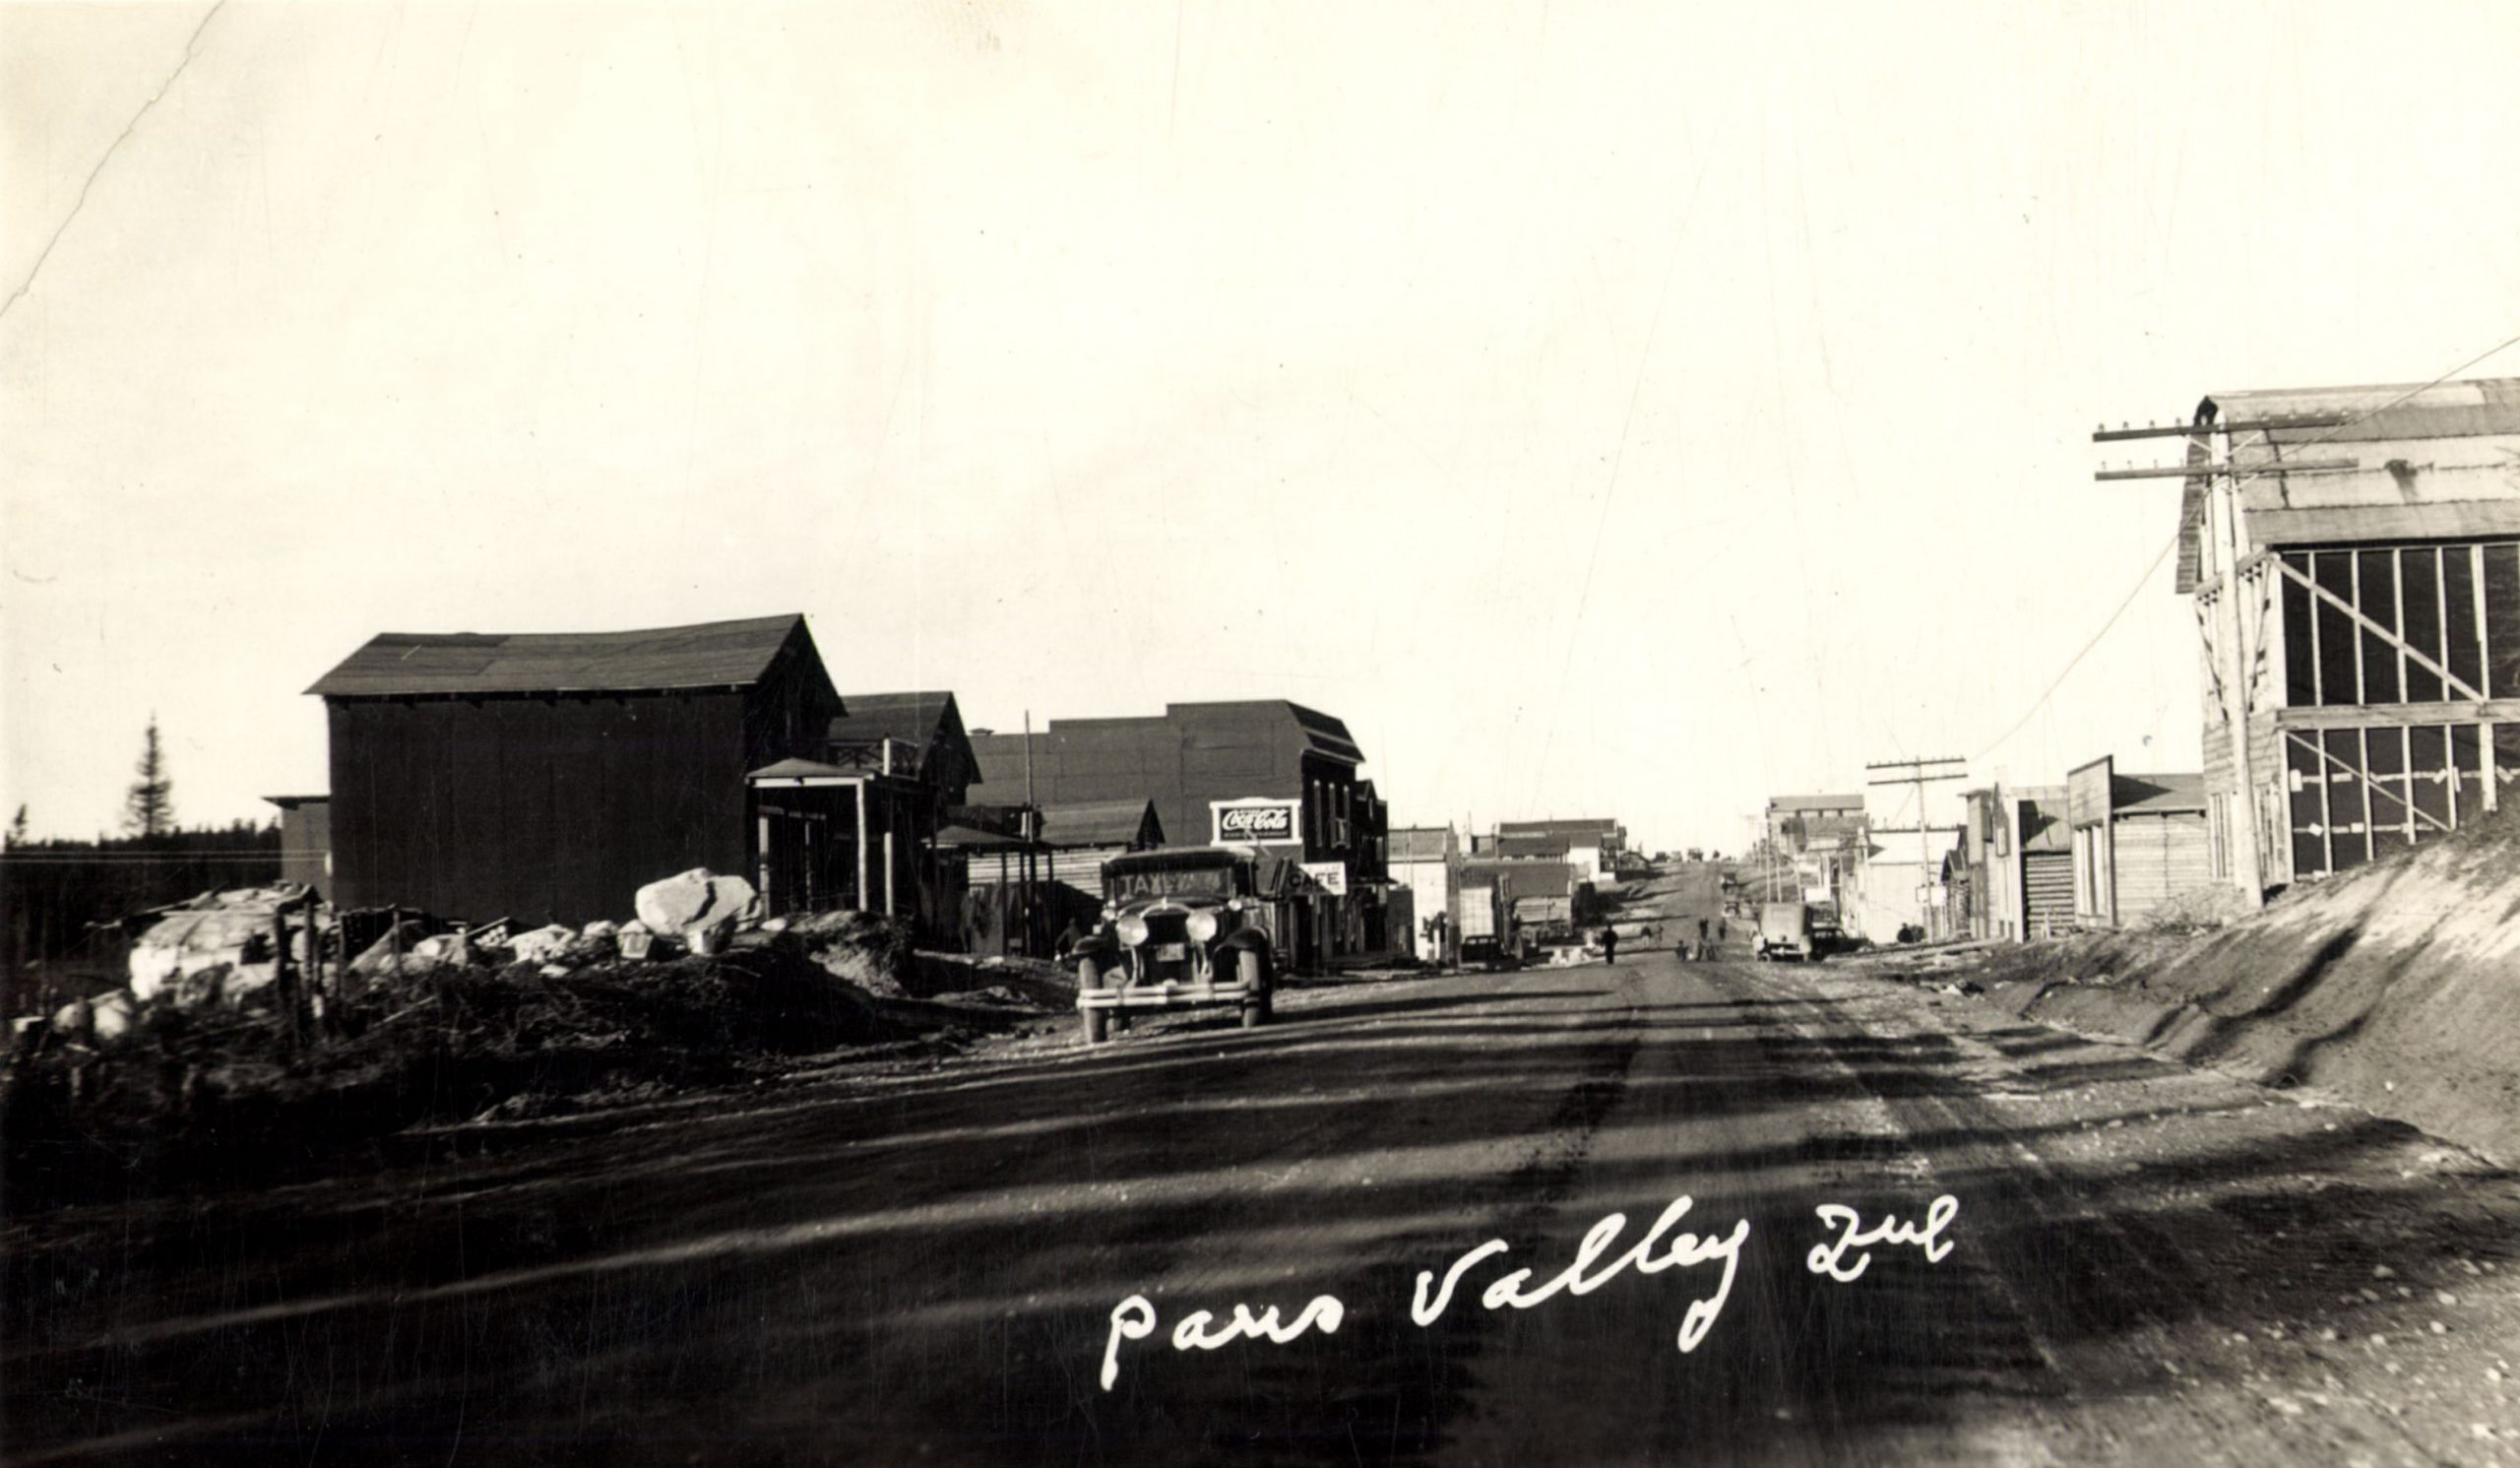 Black and white photograph of a road lined with plank buildings on which walk several pedestrians. In the foreground, a taxi cab. At the bottom, an inscription in white: "Paris Valley Que".